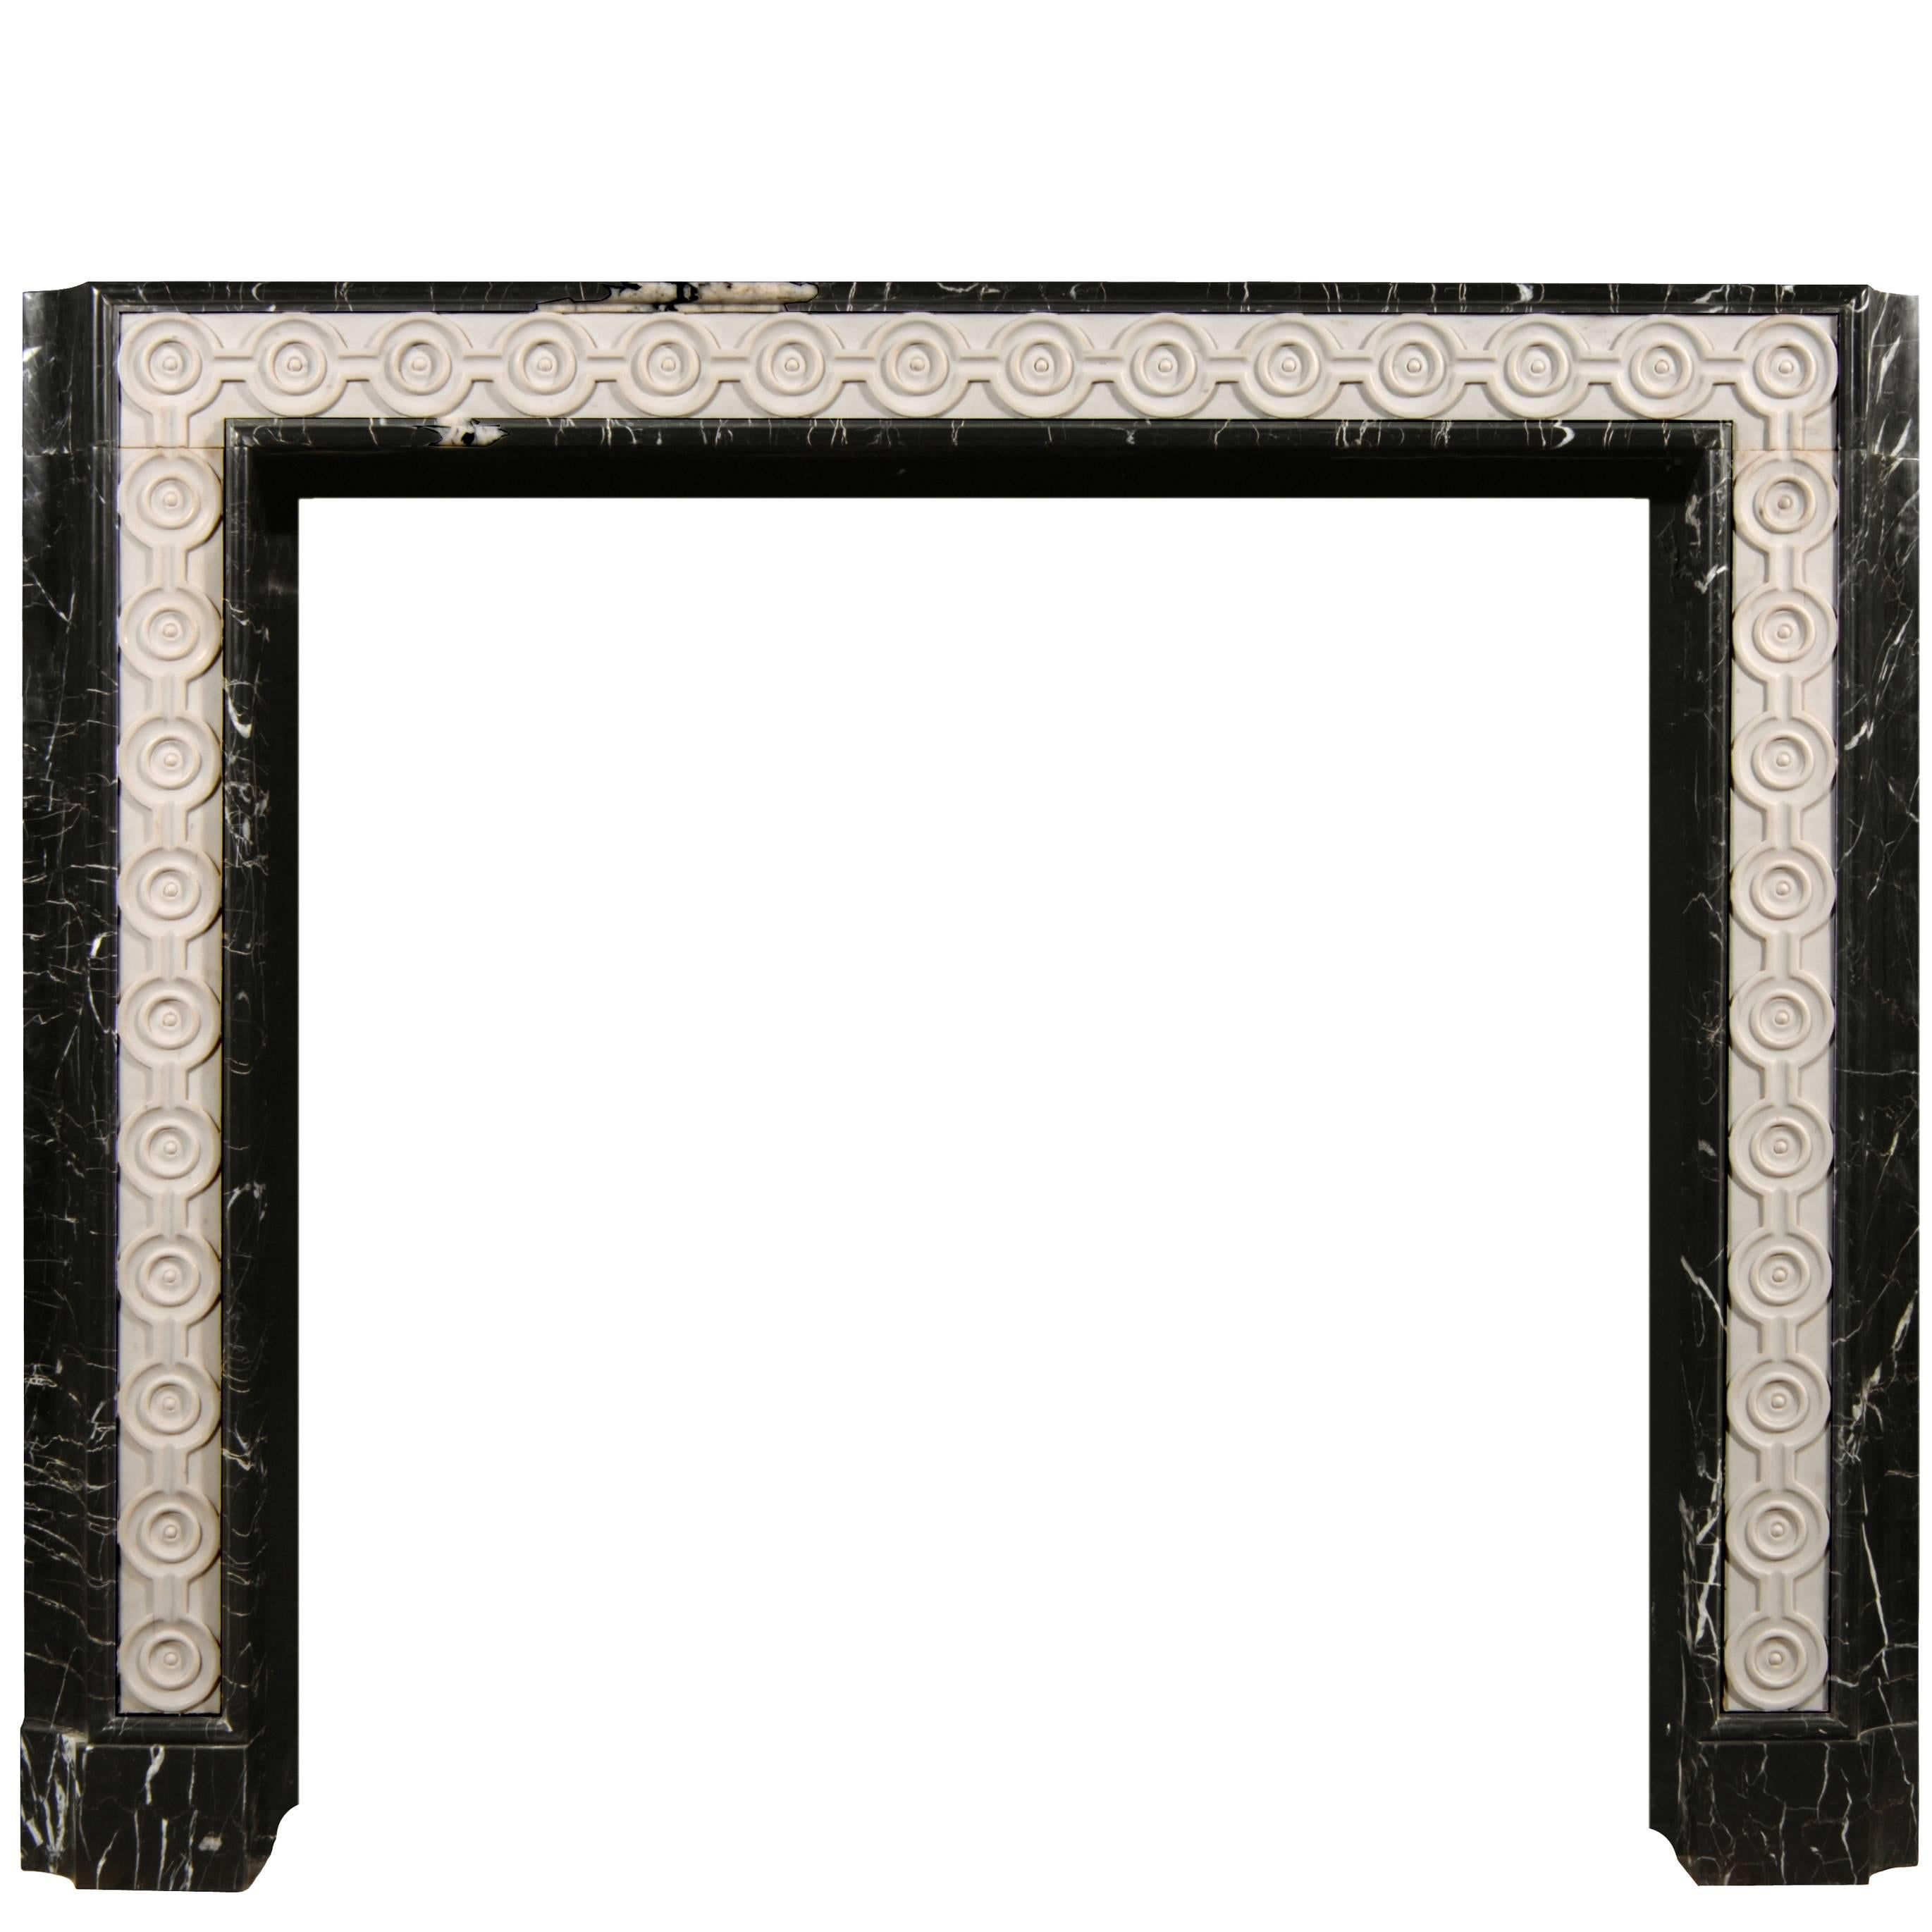 English Nero Marquina Marble Fireplace with Inlaid Statuary For Sale